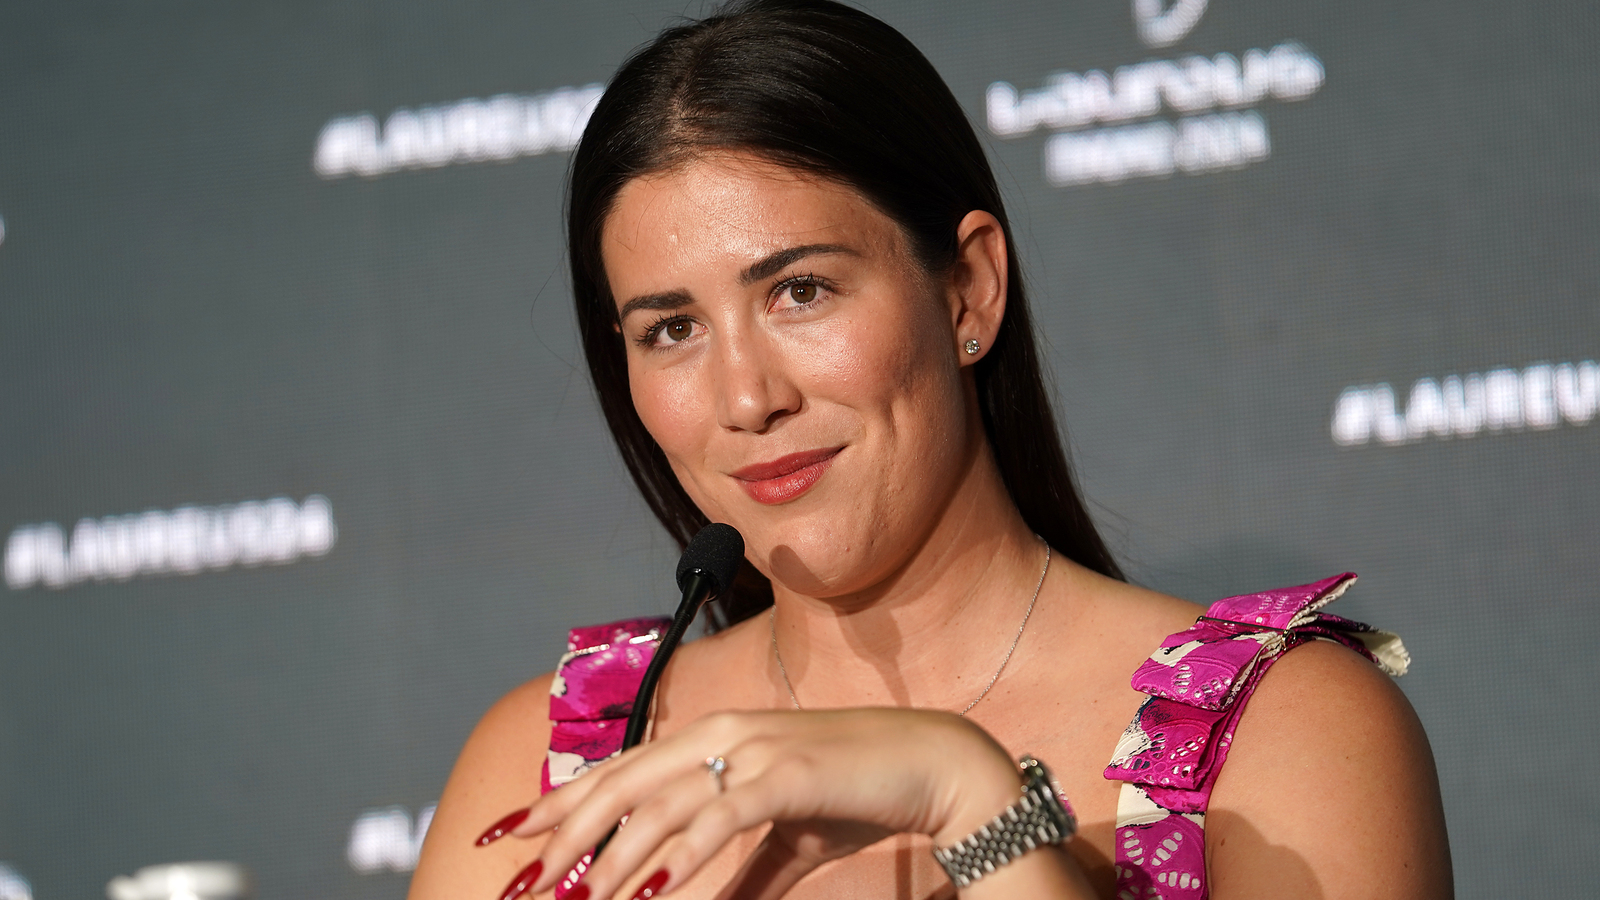 'I’m going to develop a cookie': Garbine Muguruza reveals her future plans as she looks forward to ‘doing nothing’